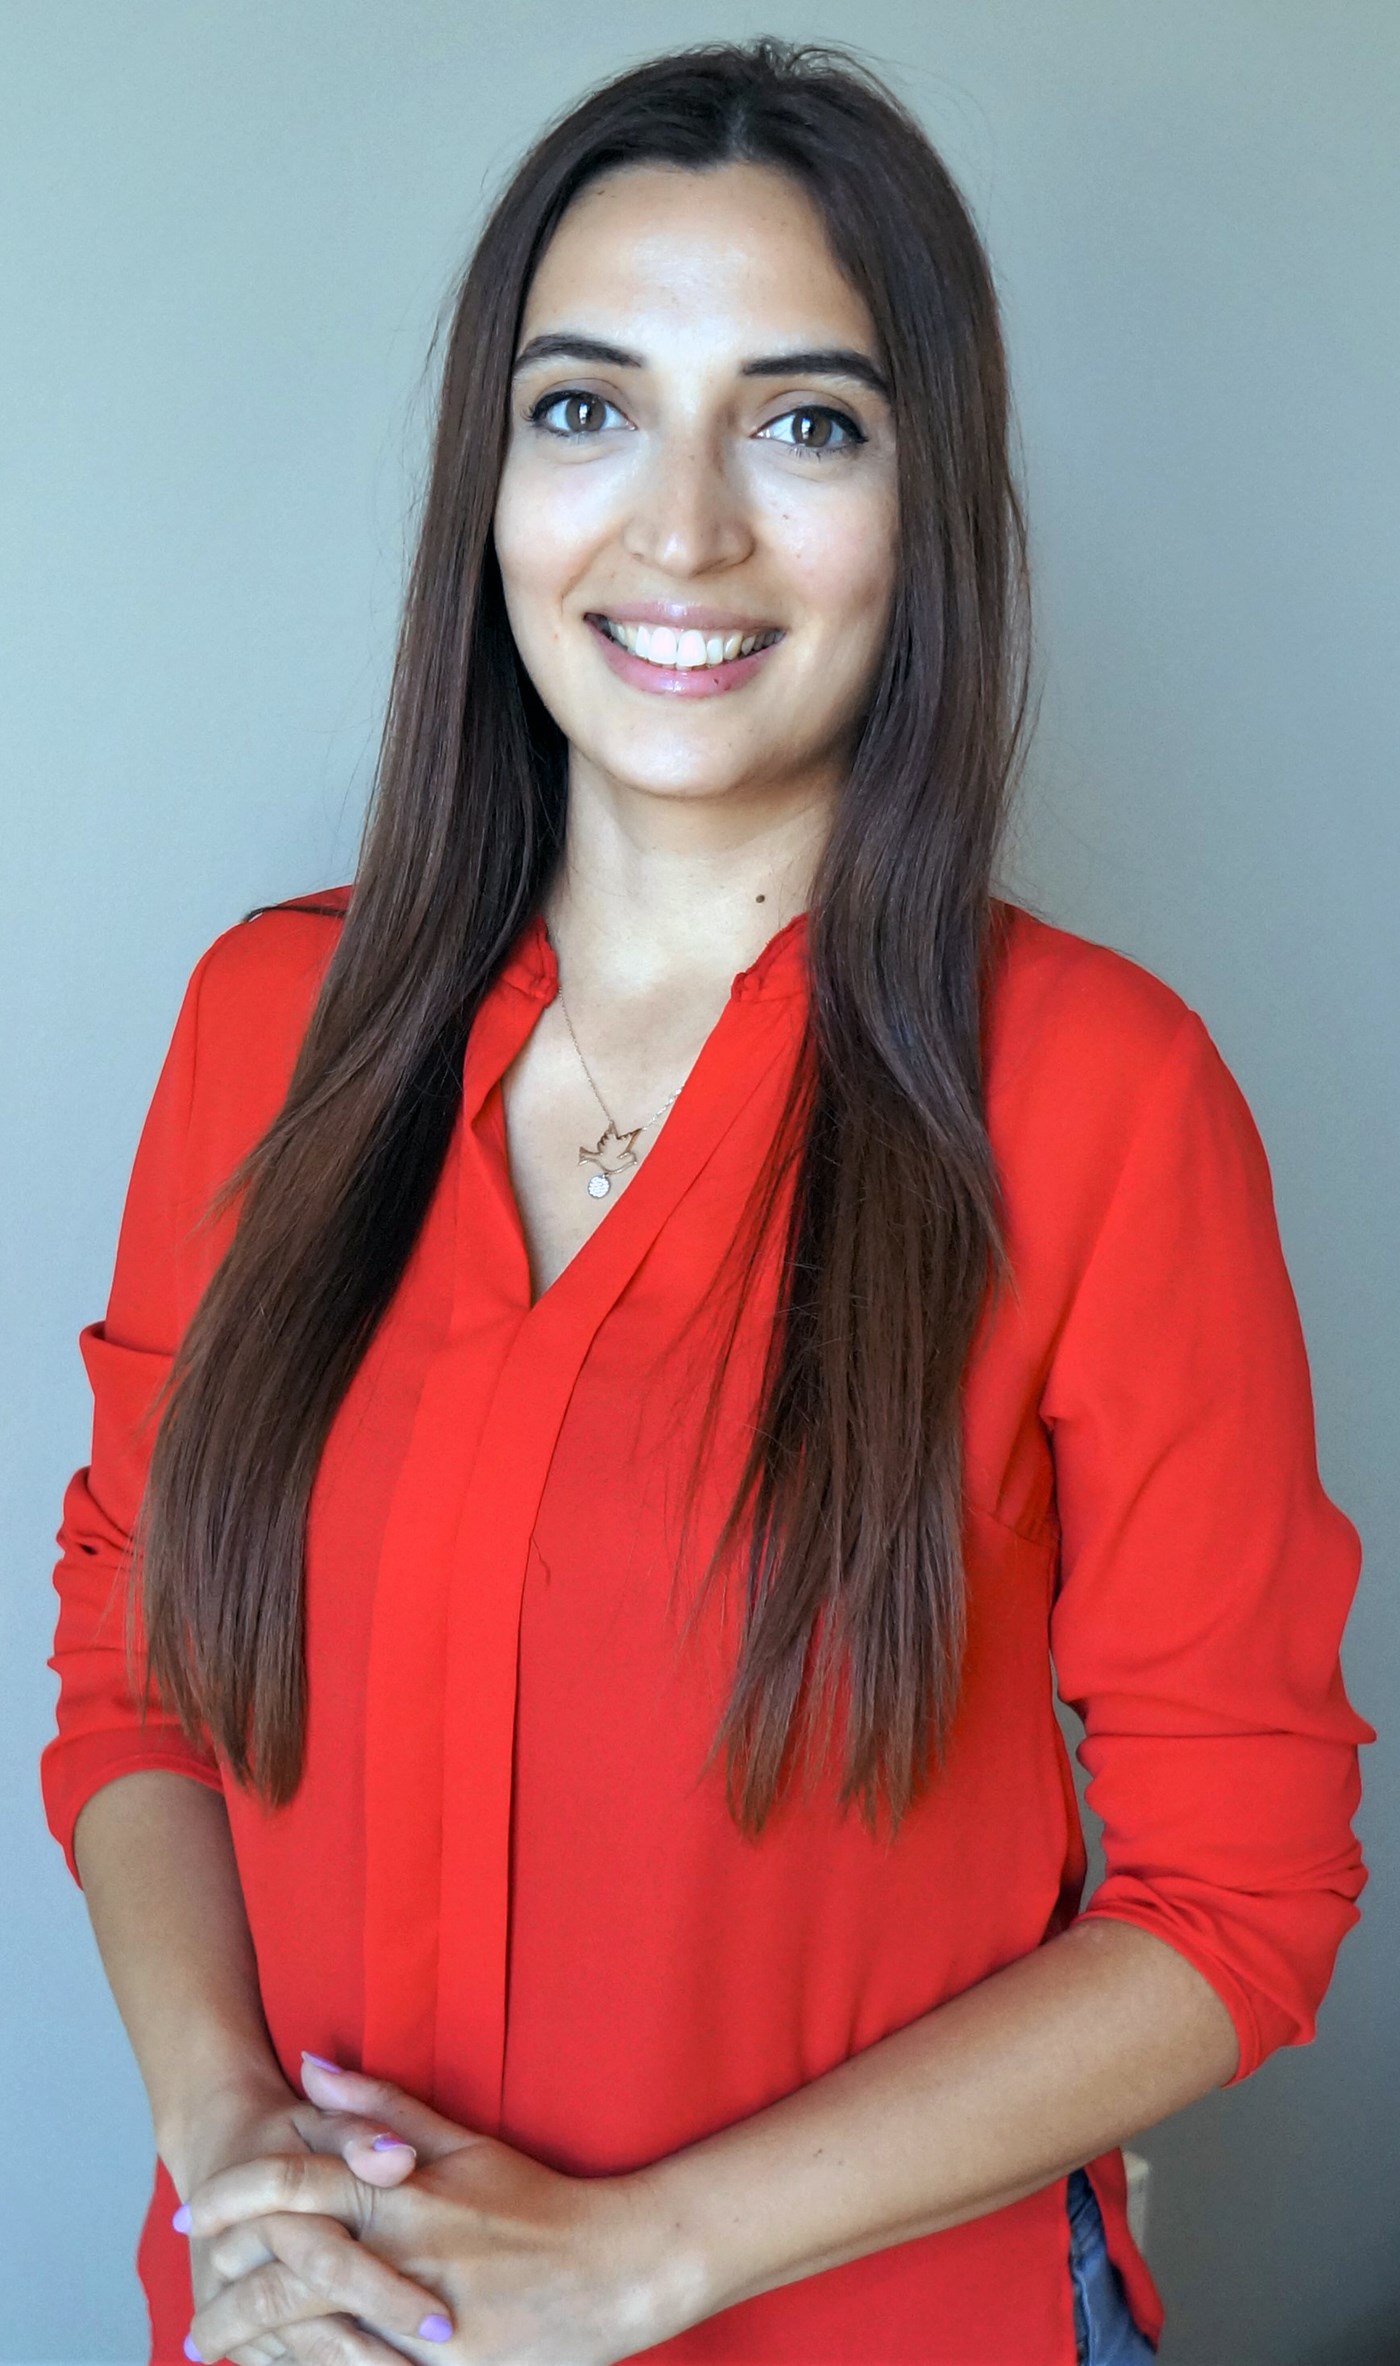 Tugba Metinyurt is an Research Assistant at the Center for Women and Work and a Ph.D. Student, Applied Psychology and Prevention Science at UMass Lowell.